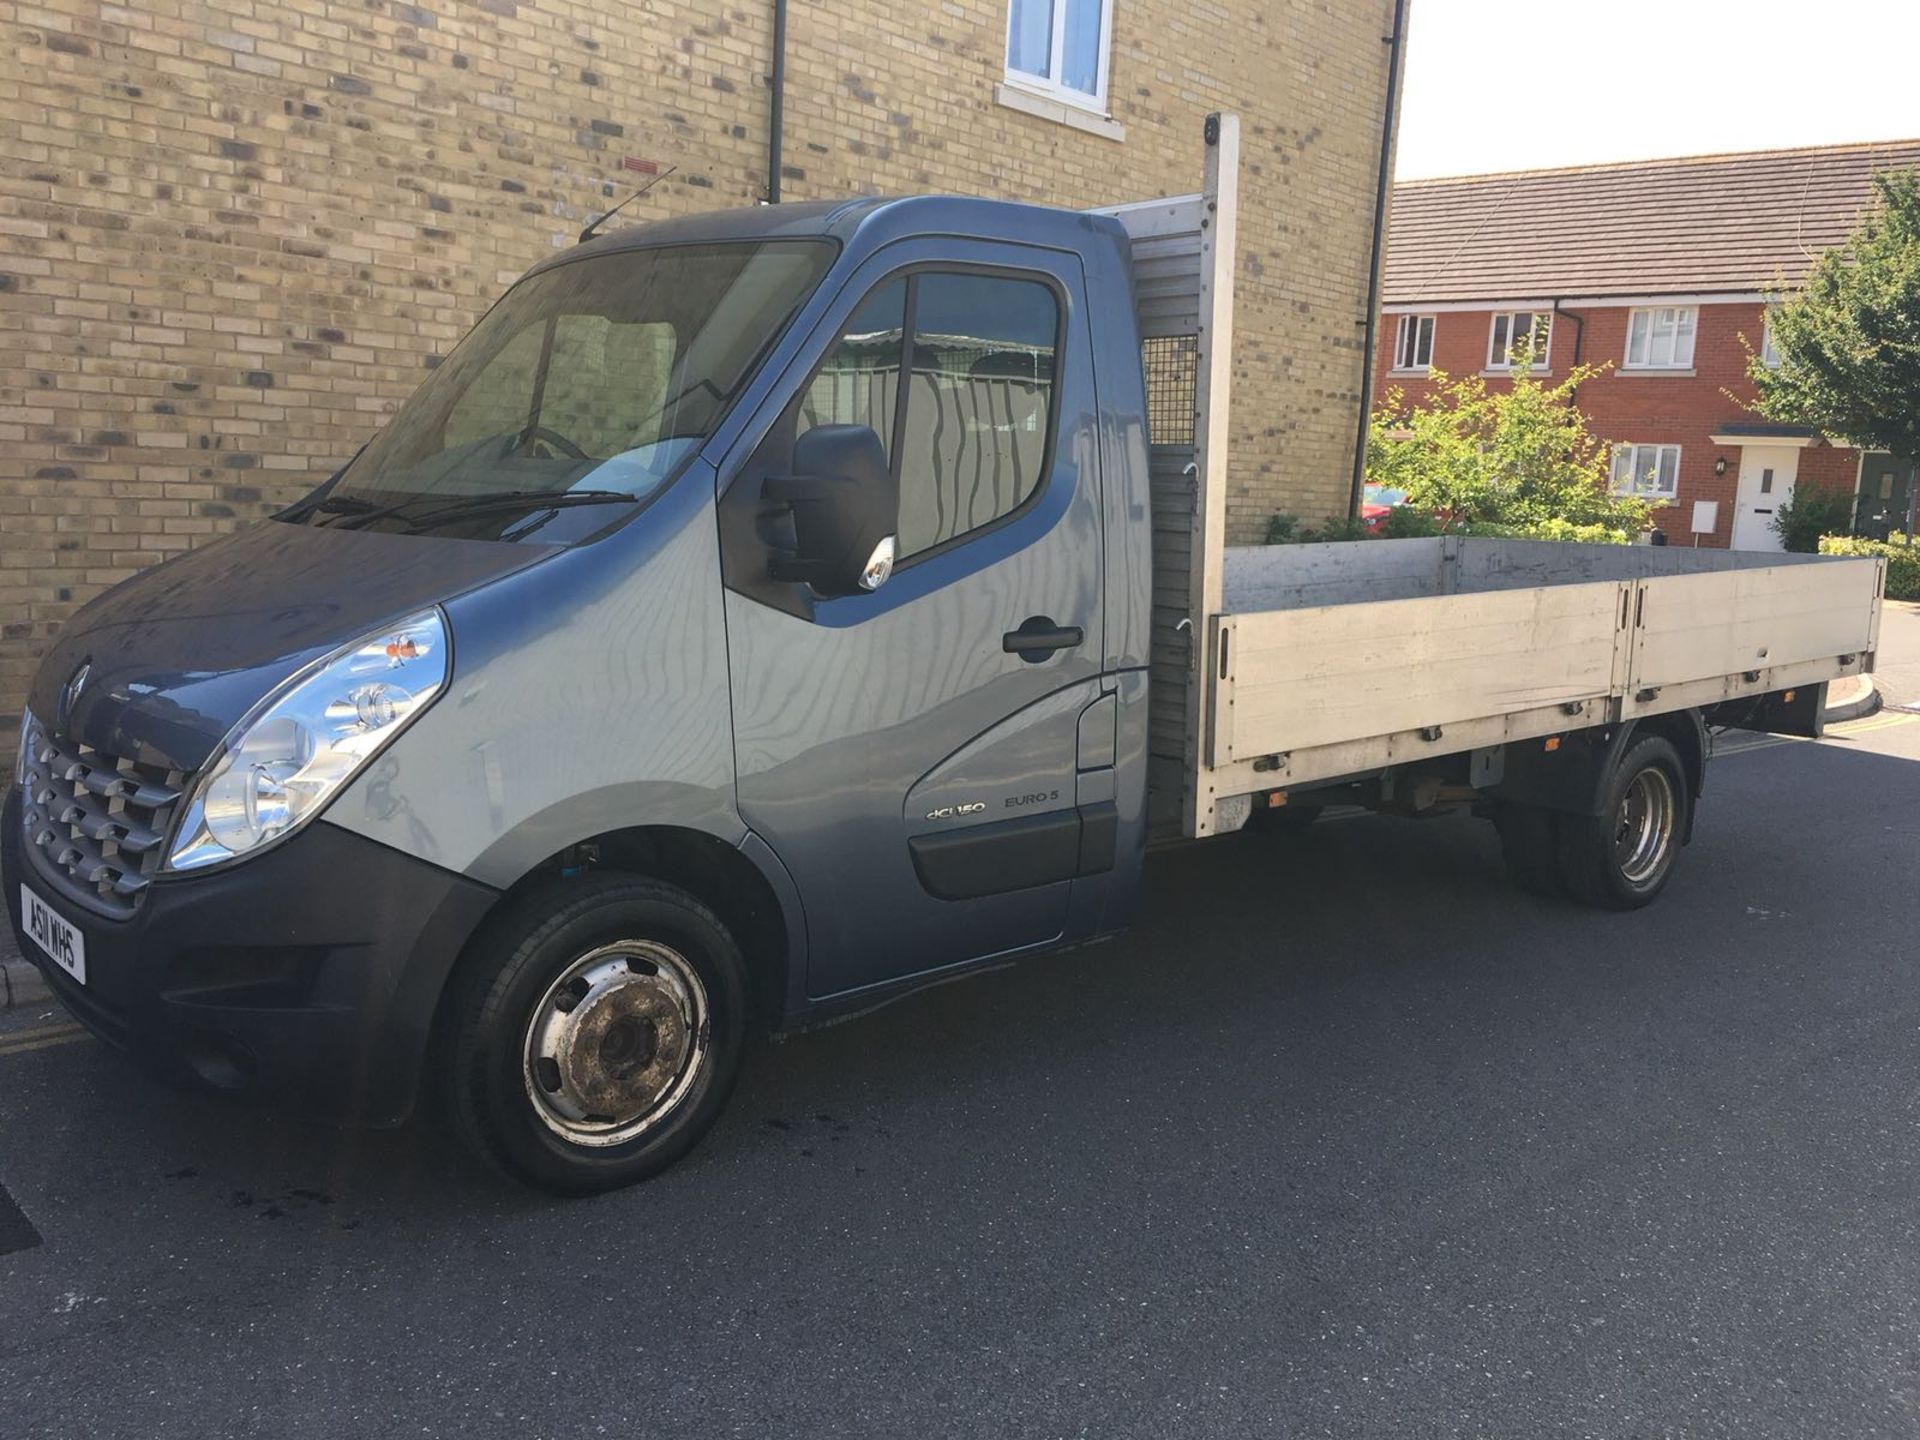 2012 RENAULT MASTER 2.3 DCI LL35 DROPSIDE PICKUP 3.5 TON GROSS TWIN WHEEL. 137,000 MILES.